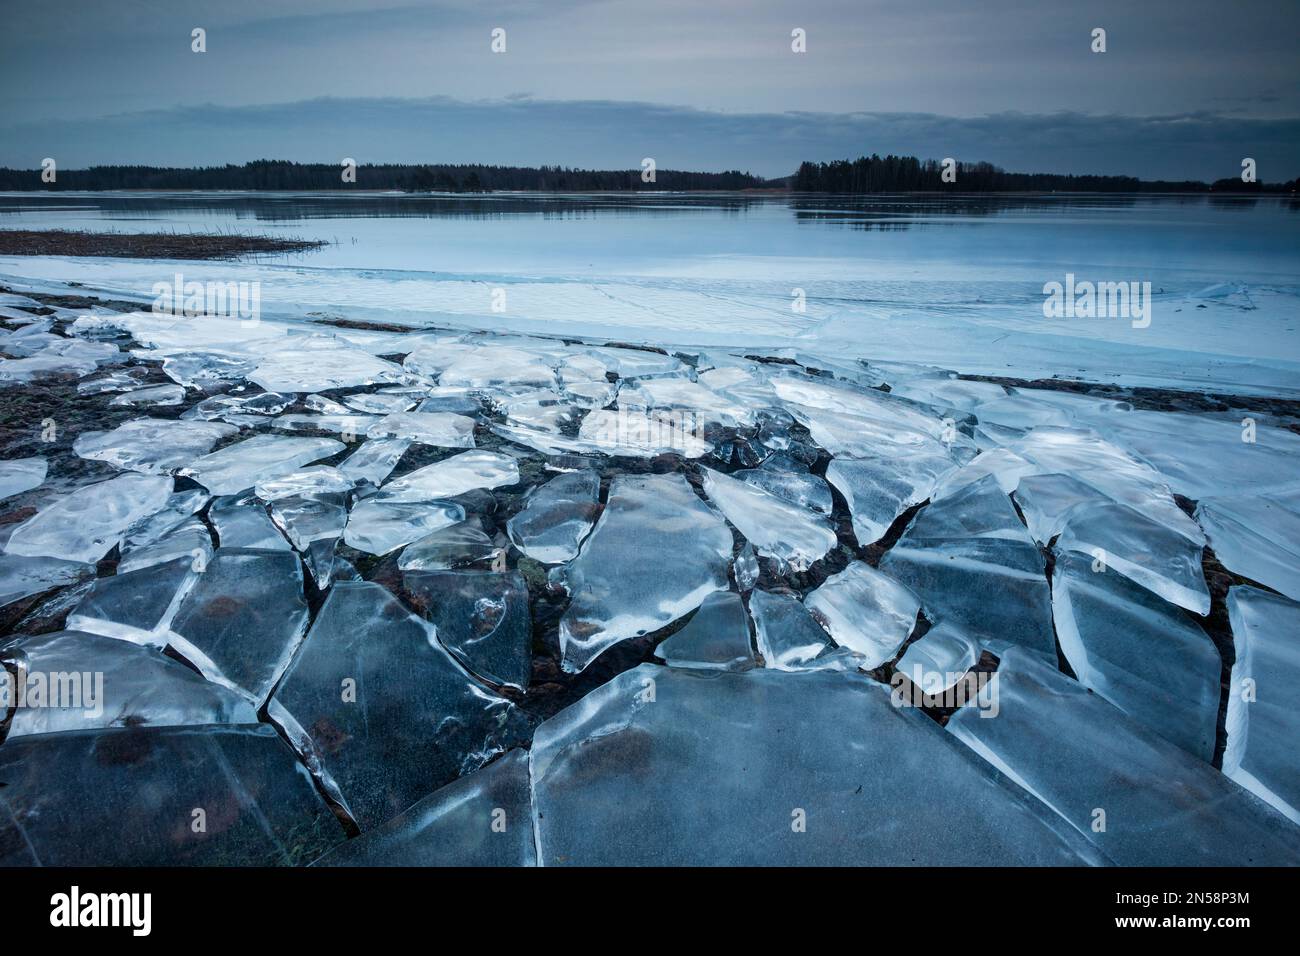 Ice formations and early morning winter landscape by the lake Vansjø, Østfold, Norway, Scandinavia. Stock Photo